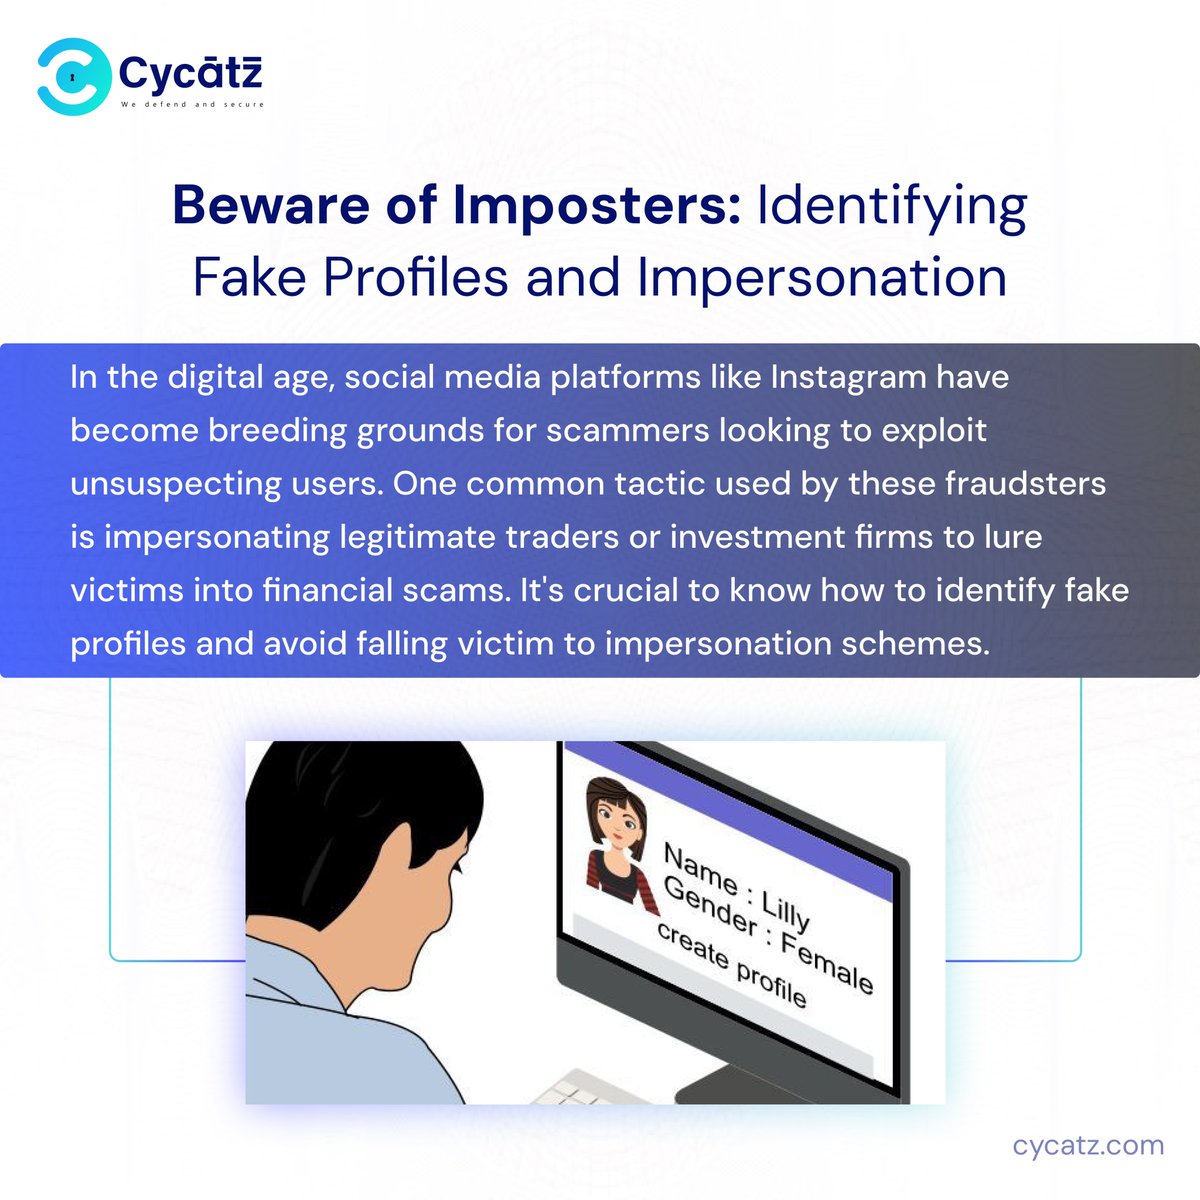 #CyCatz #Cybersecurity Be aware of Imposters: Identifying Fake Profiles & Impersonation

#cyberawareness #cyberattack #breaches #databreaches #cybercrime #darkwebmonitoring #SurfaceWebMonitoring  #emailsecurity #vendorriskmanagement #BrandMonitoring #fake #profiles